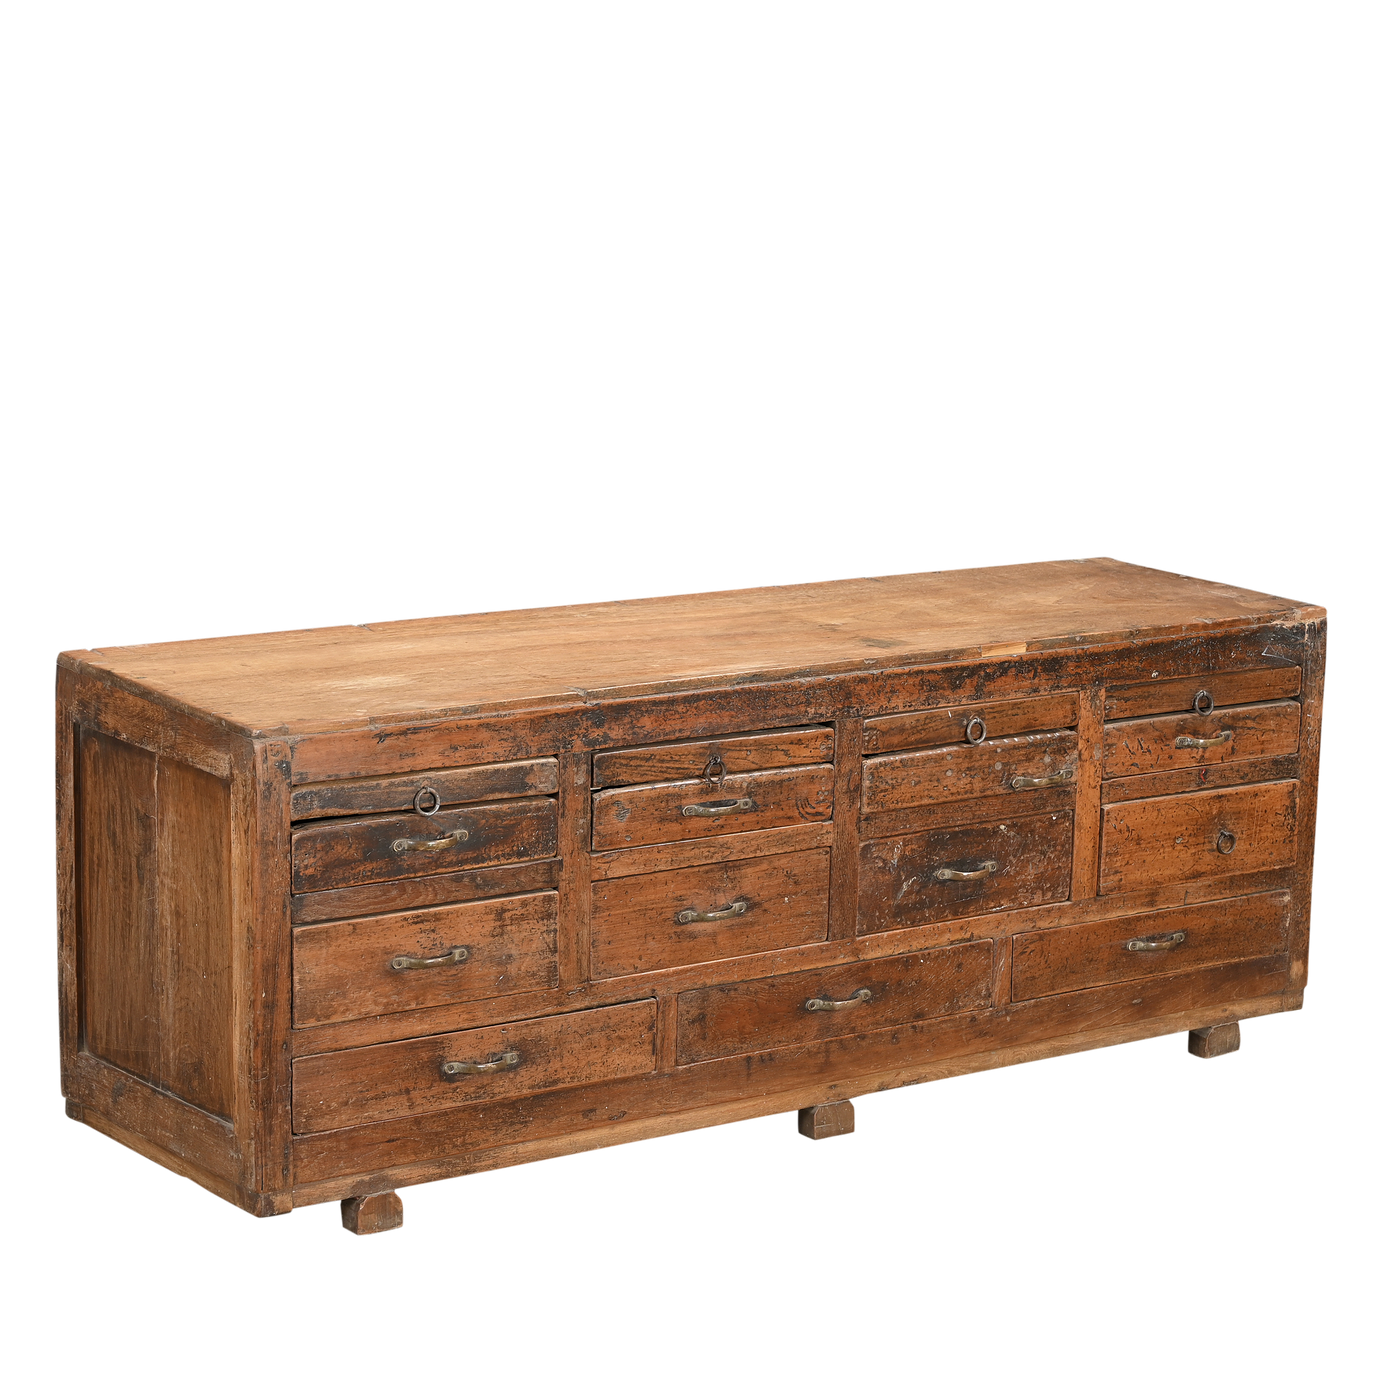 SEDAM - Low furniture with drawers